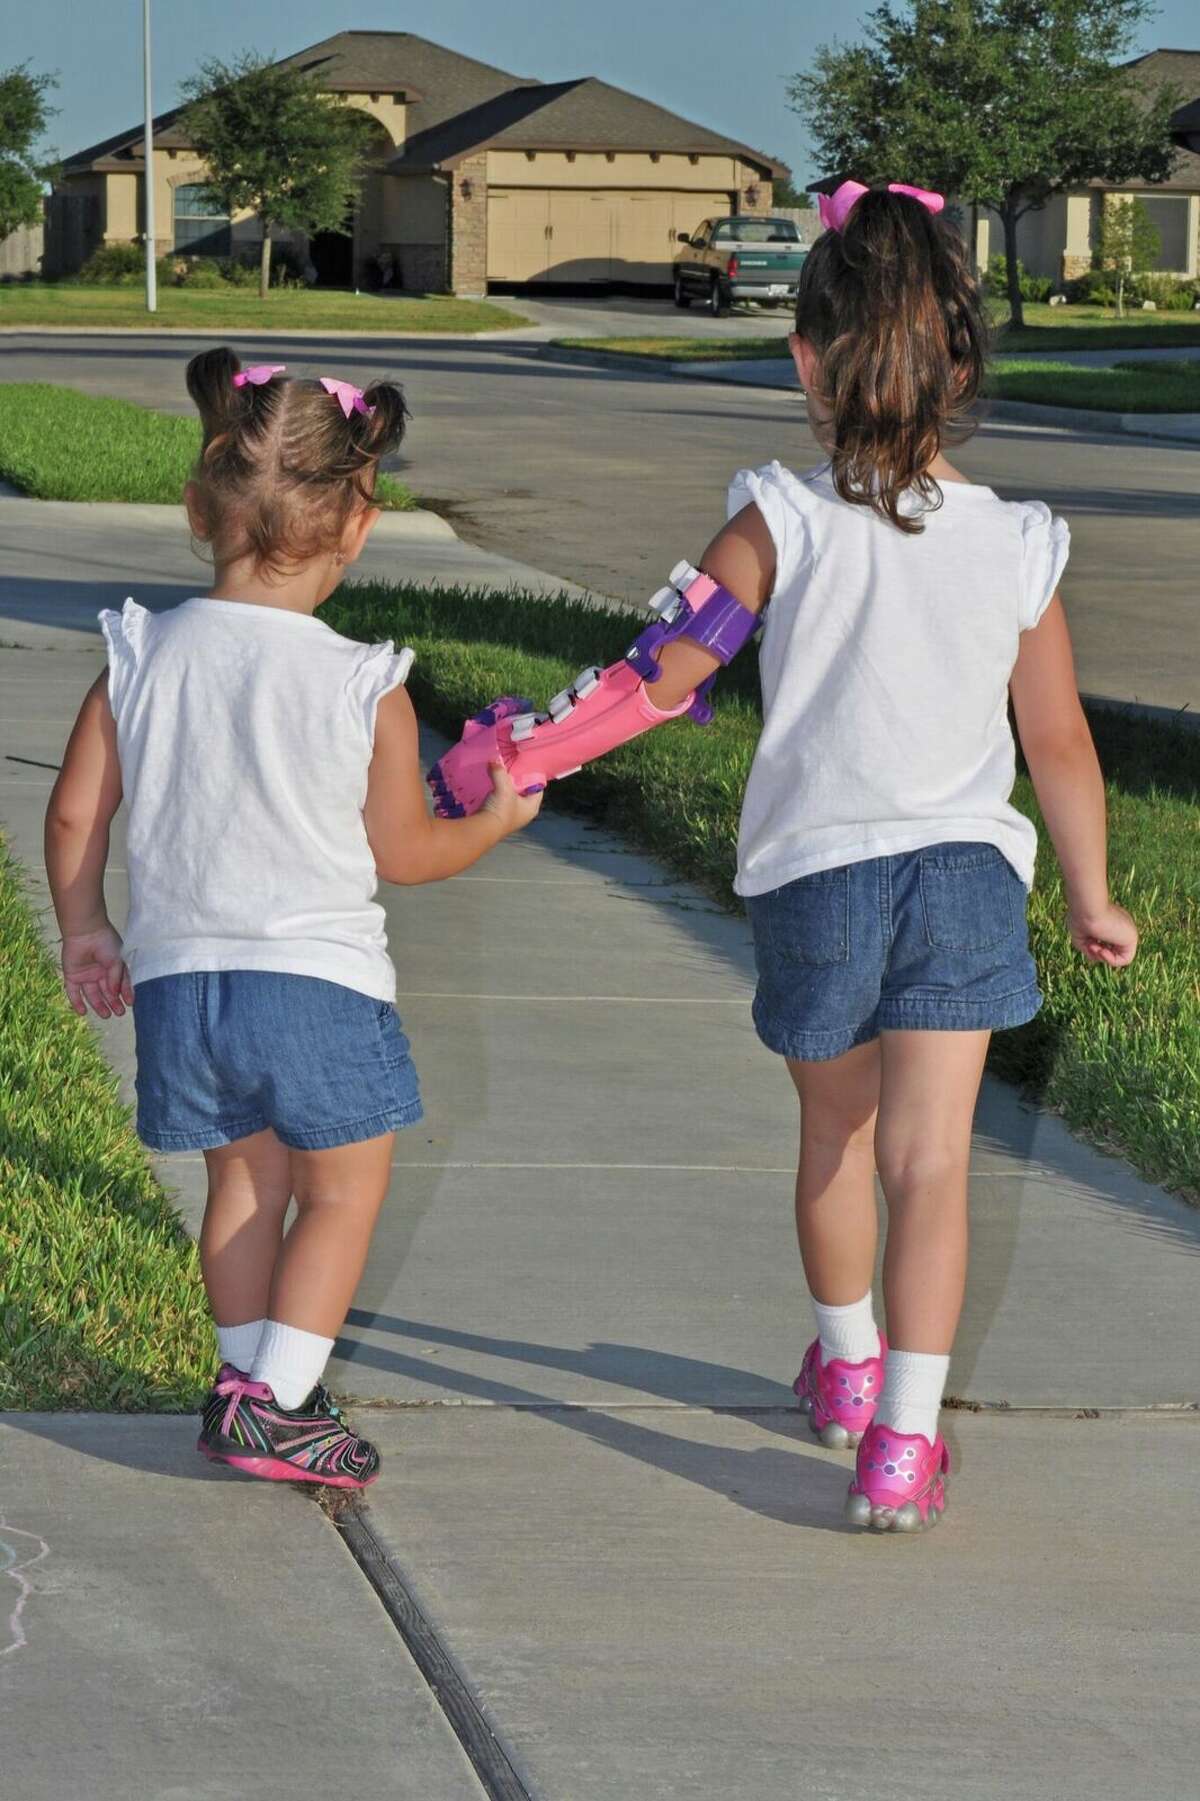 Katelyn Vincik, 5, of Victoria, received a prosthetic hand from the Clear Lake library, which used its 3D printer to make it. She is seen here walking with her sister Lacey. 3.